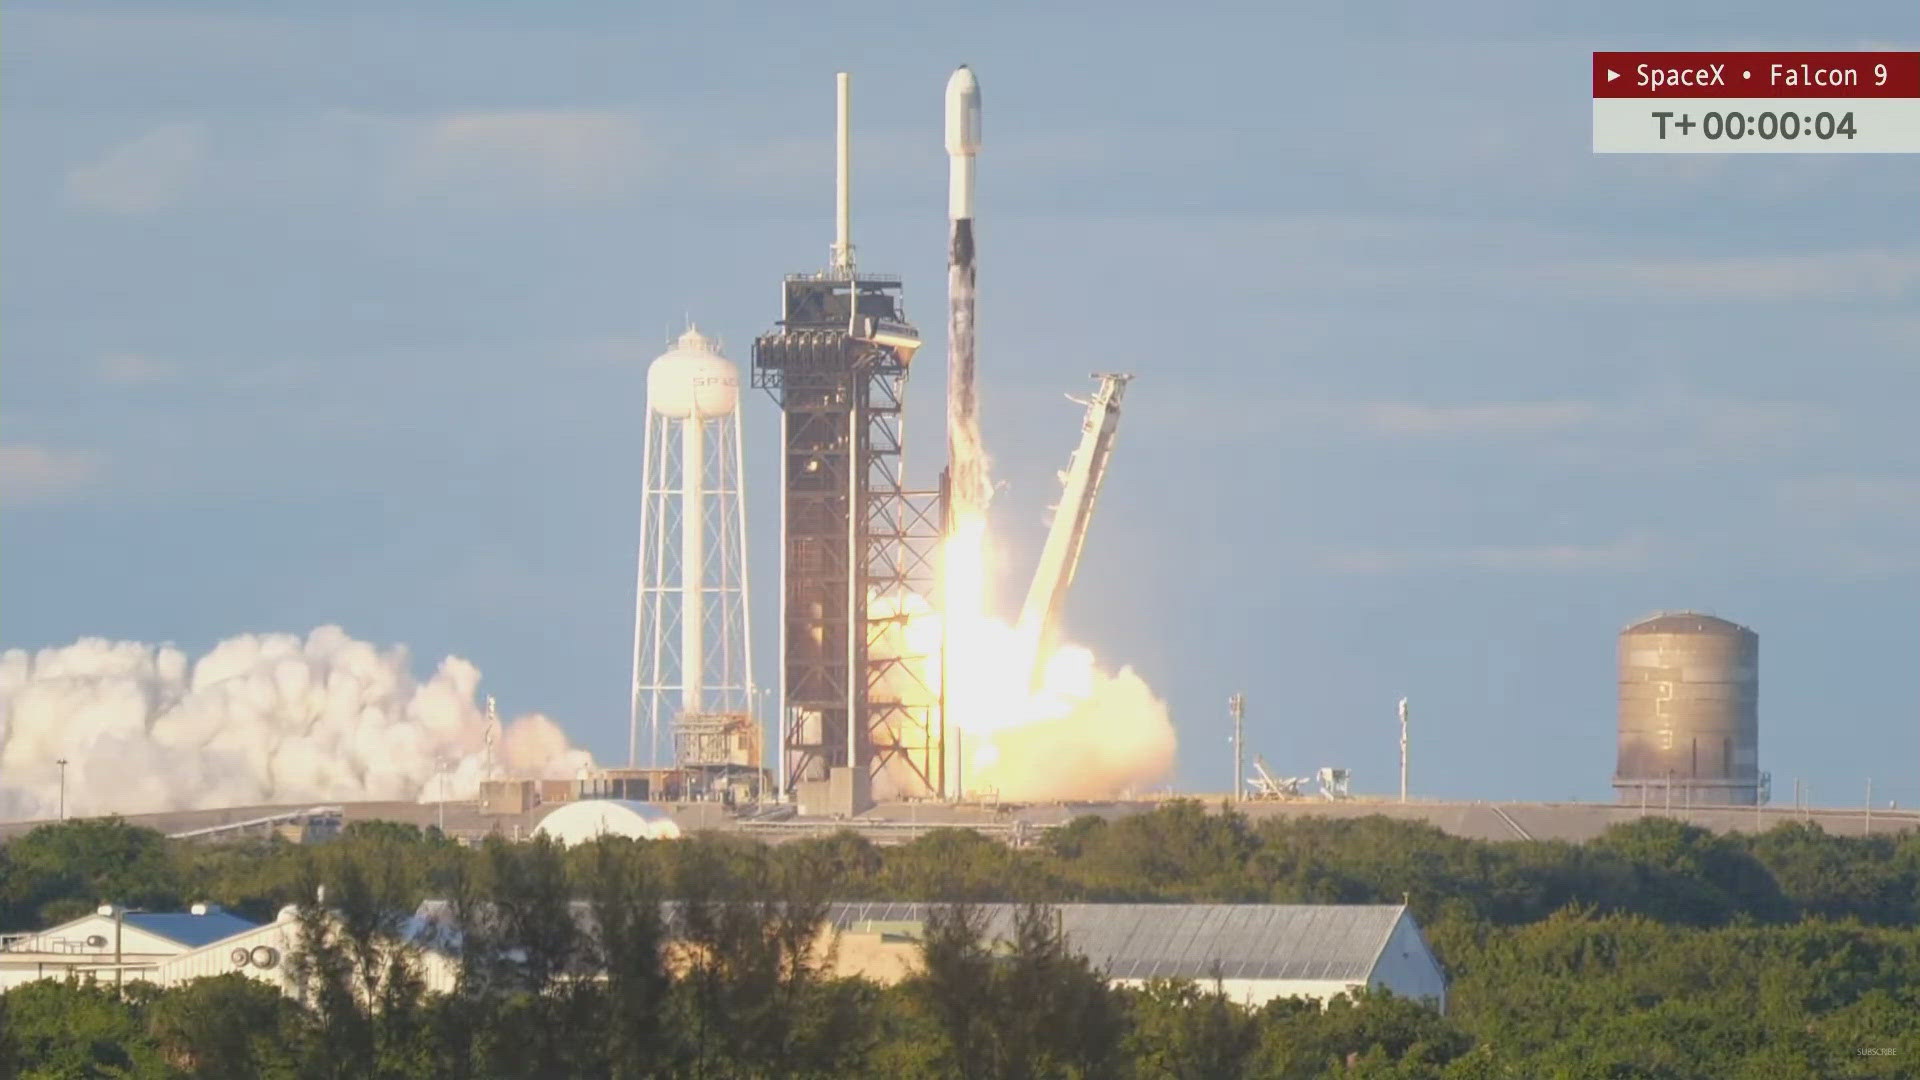 After three-hour delay, SpaceX is targeting Wednesday for a Falcon 9 launch from Launch Complex 39A at NASA’s Kennedy Space Center.